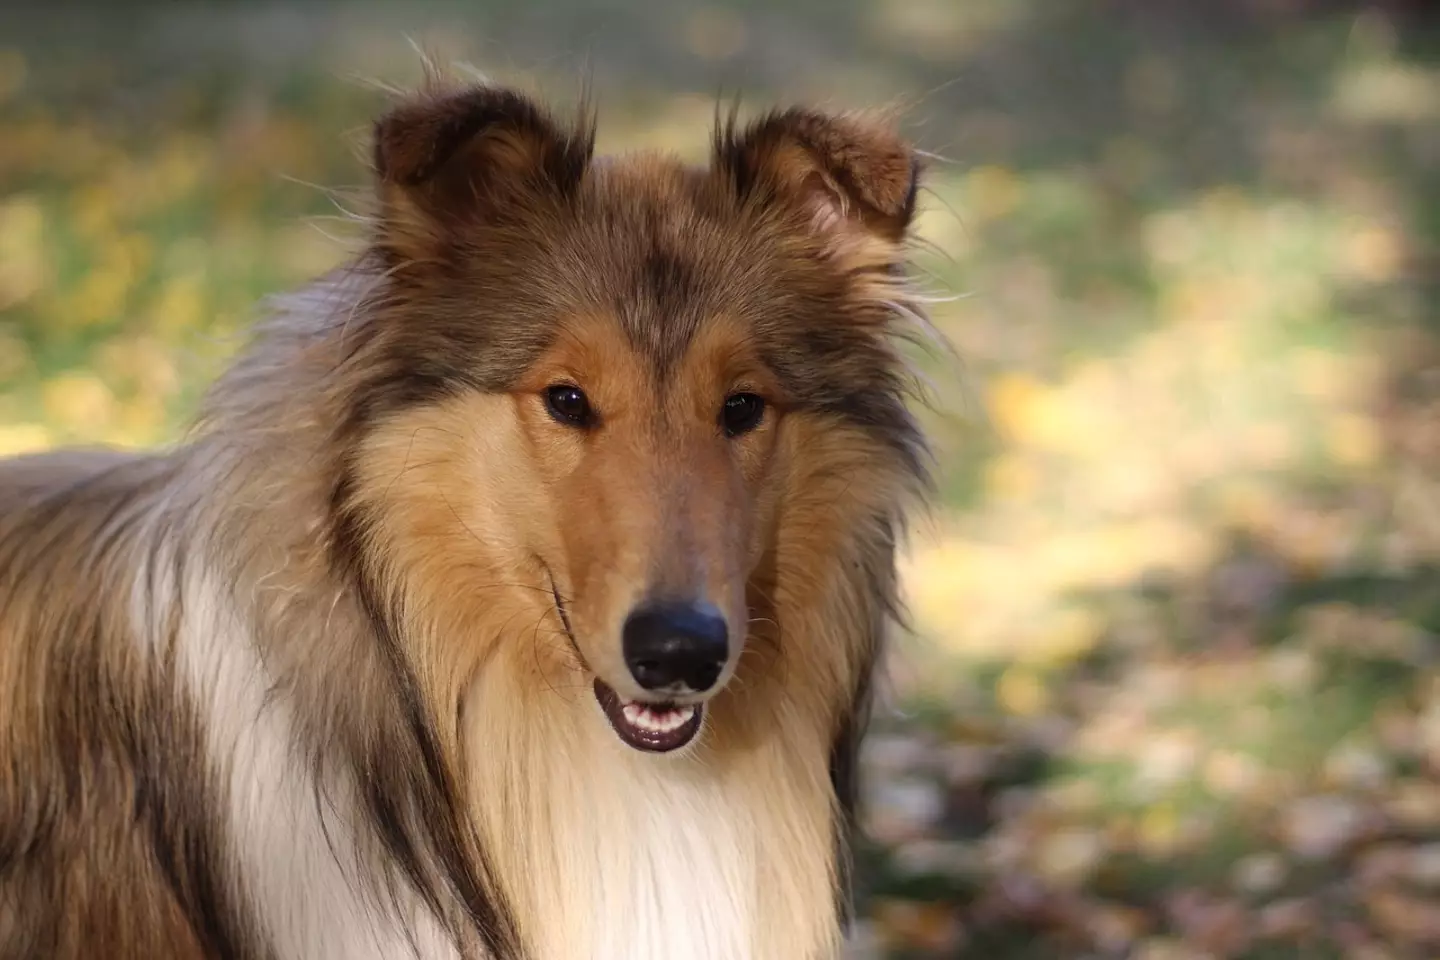 How about a Rough Collie?